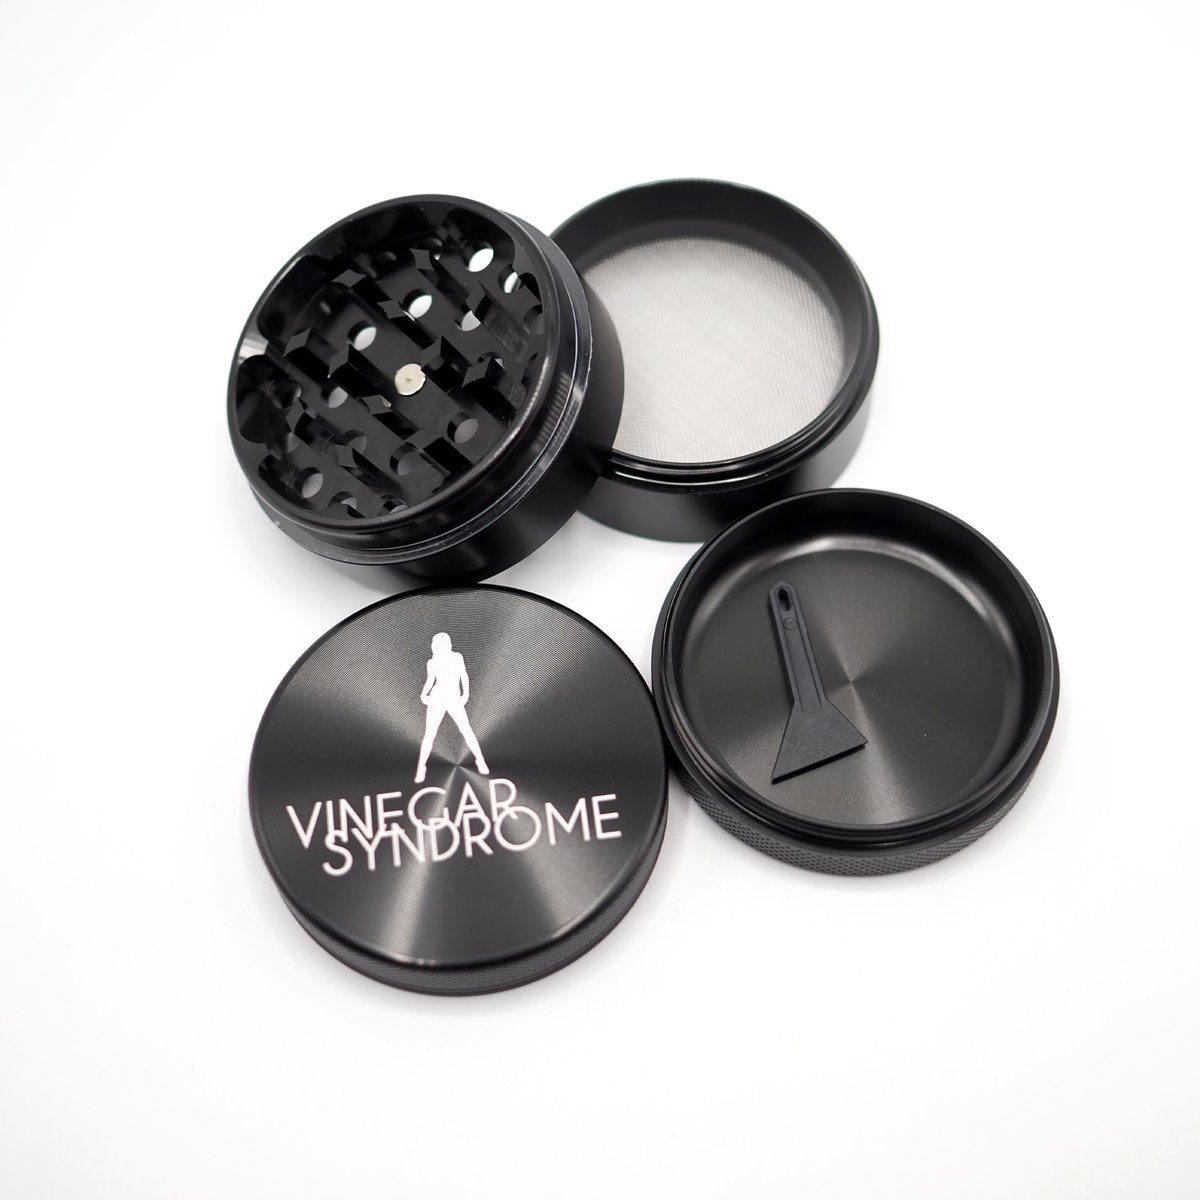 VS Grinders are gone. VS Rolling Papers are still just barely in stock. Celebrate 4/20 in style! vinegarsyndrome.com/products/vineg…